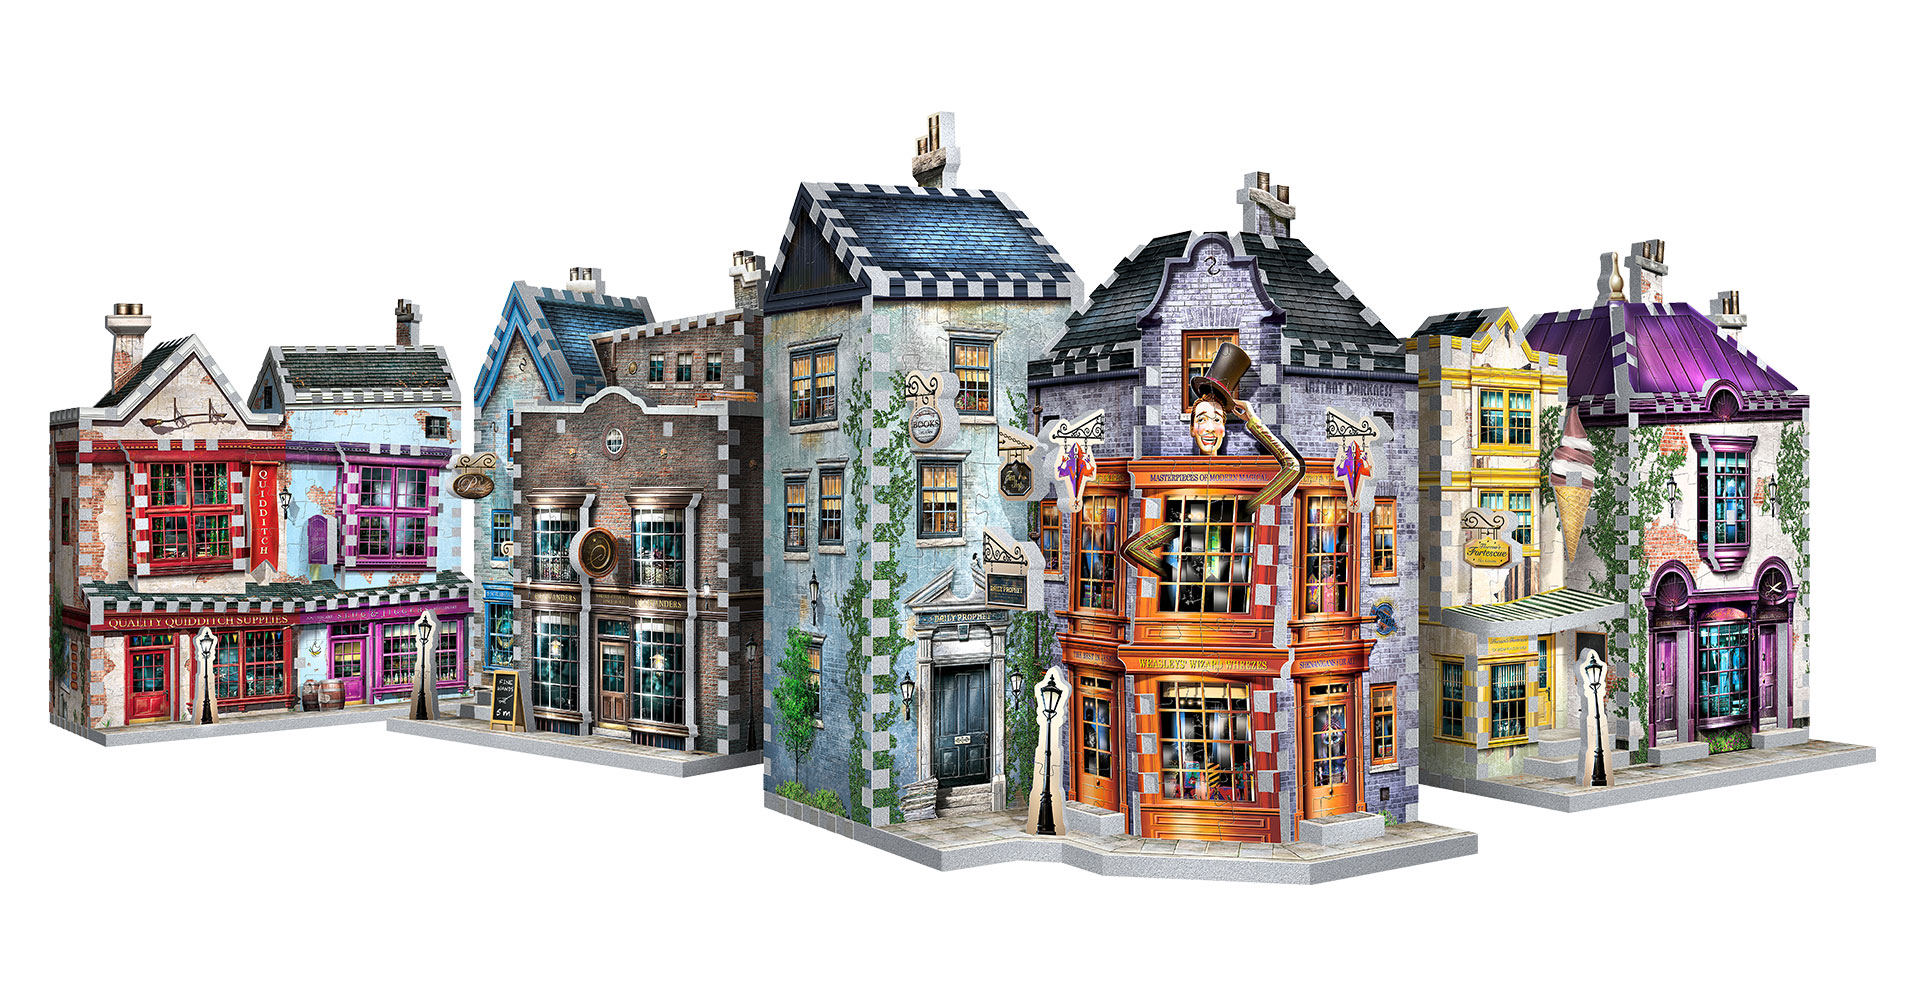 Games Harry Potter Diagon Alley 3d Jigsaw Puzzle 450pce for sale online